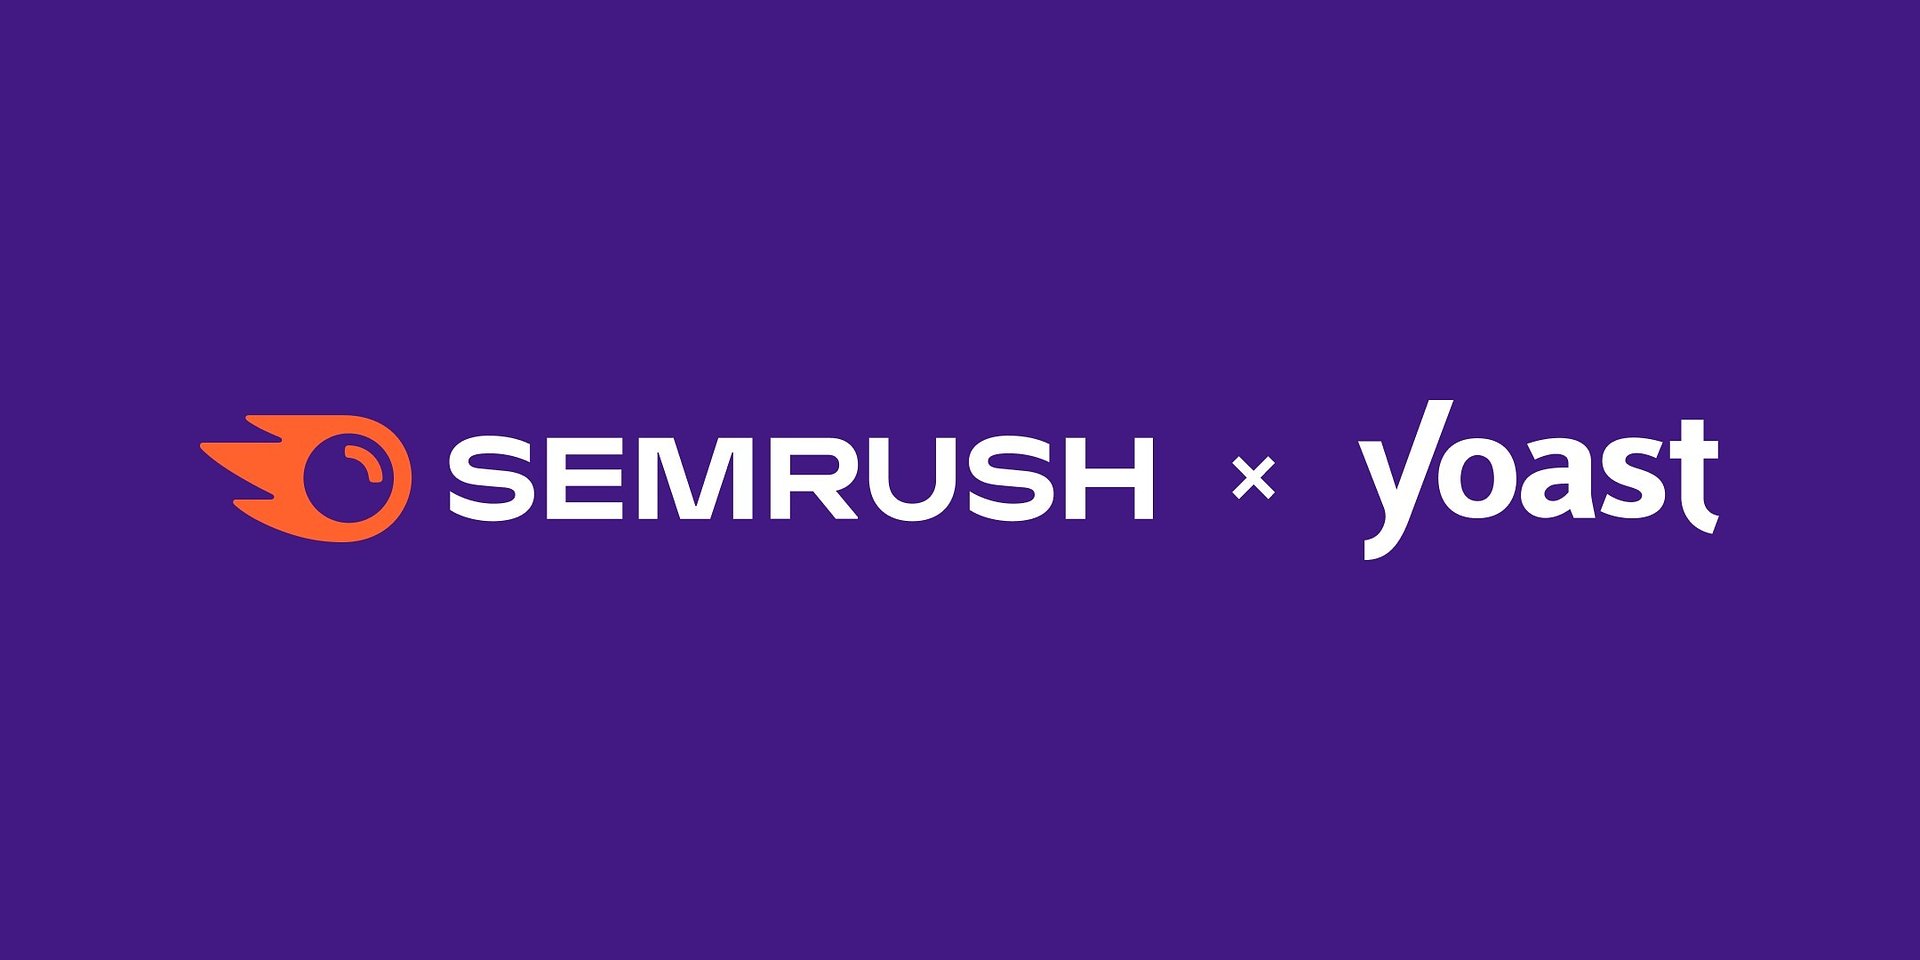 Discover Related Keywords from Semrush now in Yoast Shopify App